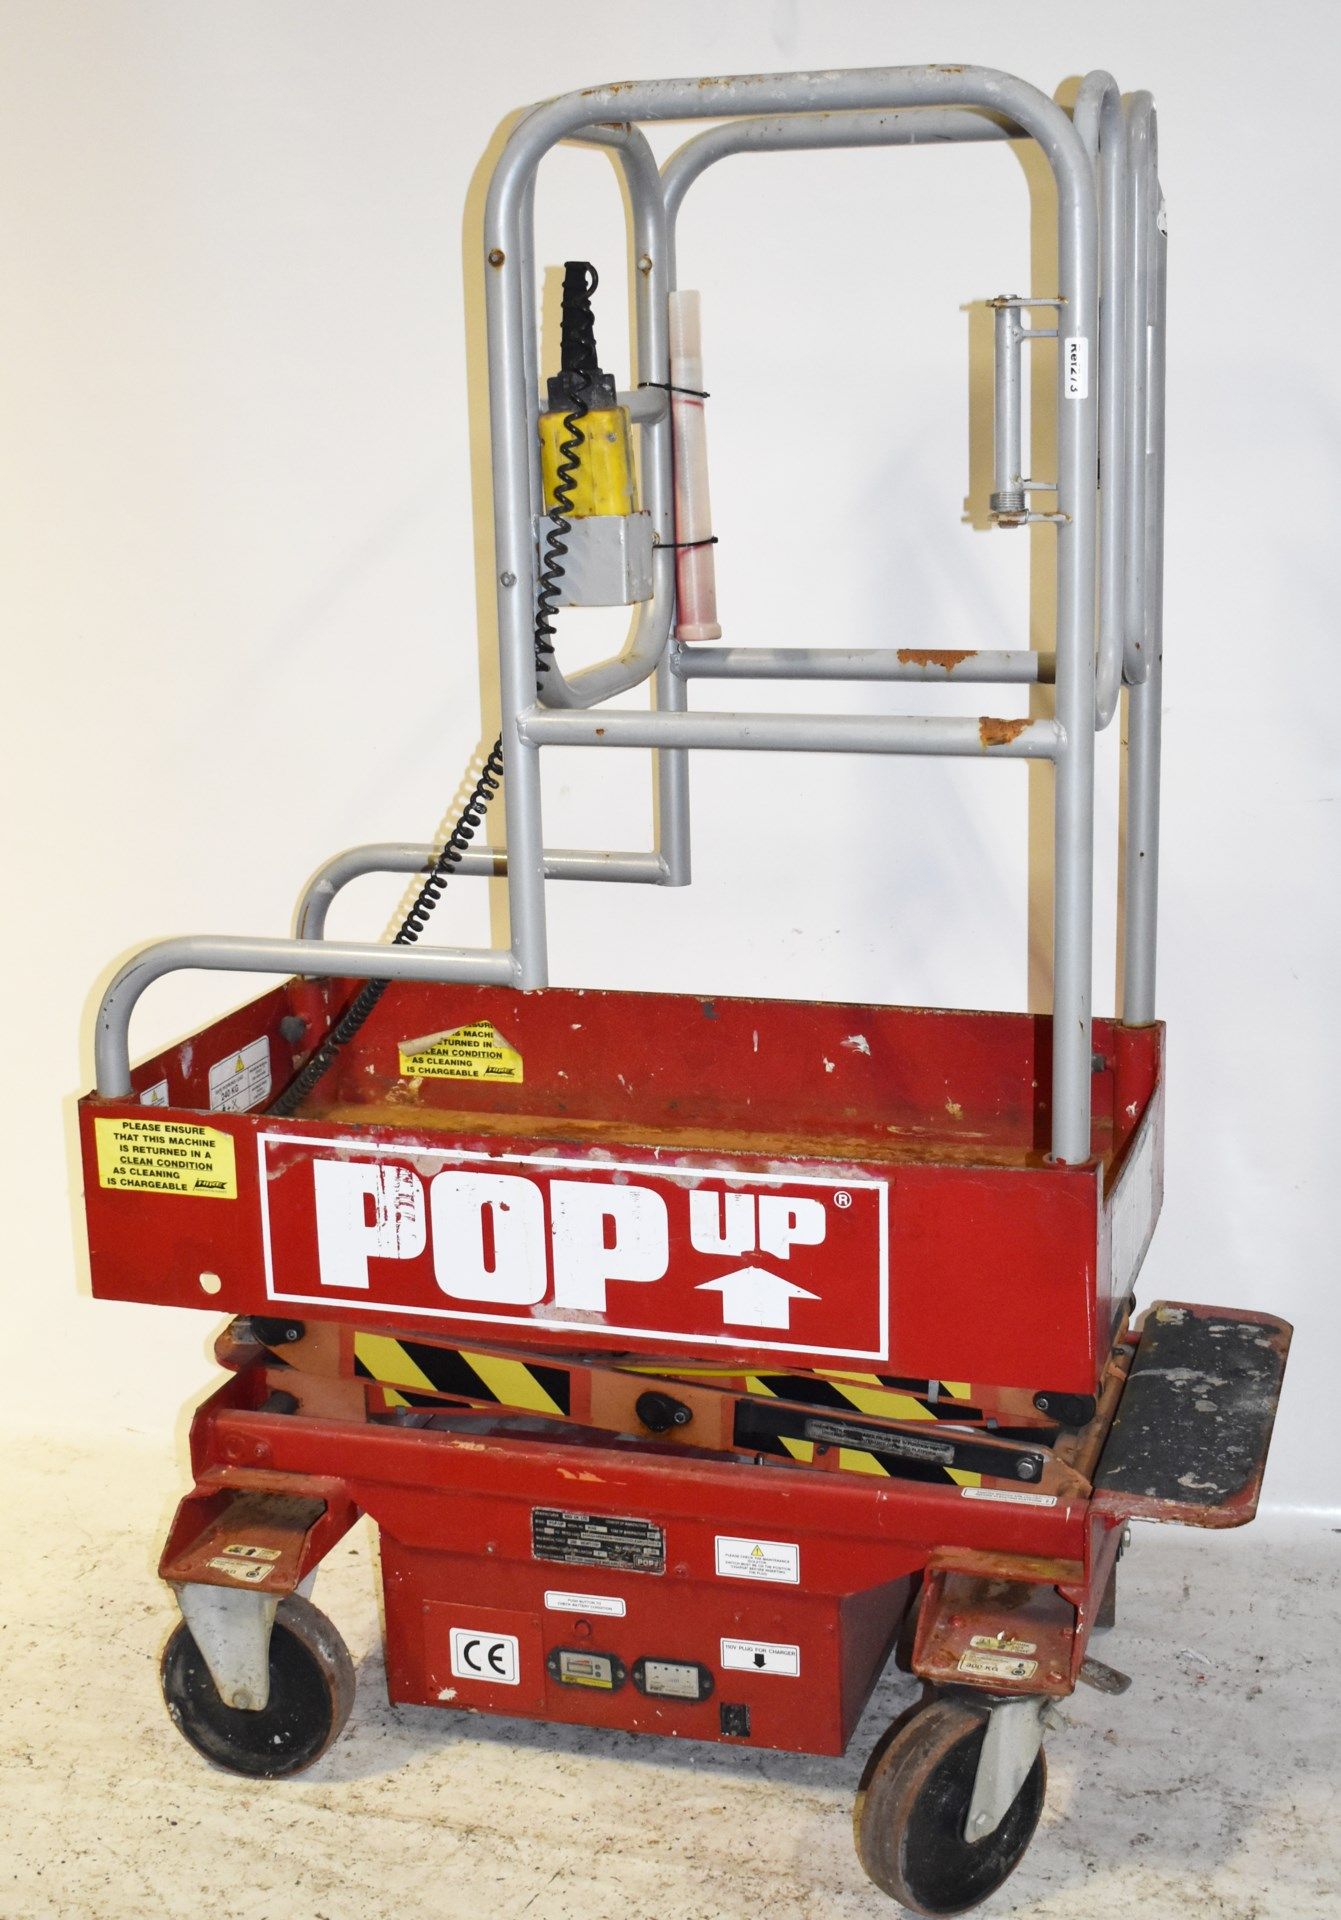 1 x Mobile Pop-Up Scissor Lift - Weight Capacity 300kg - Platform Base Max Height 161 cms - Tested - Image 8 of 8